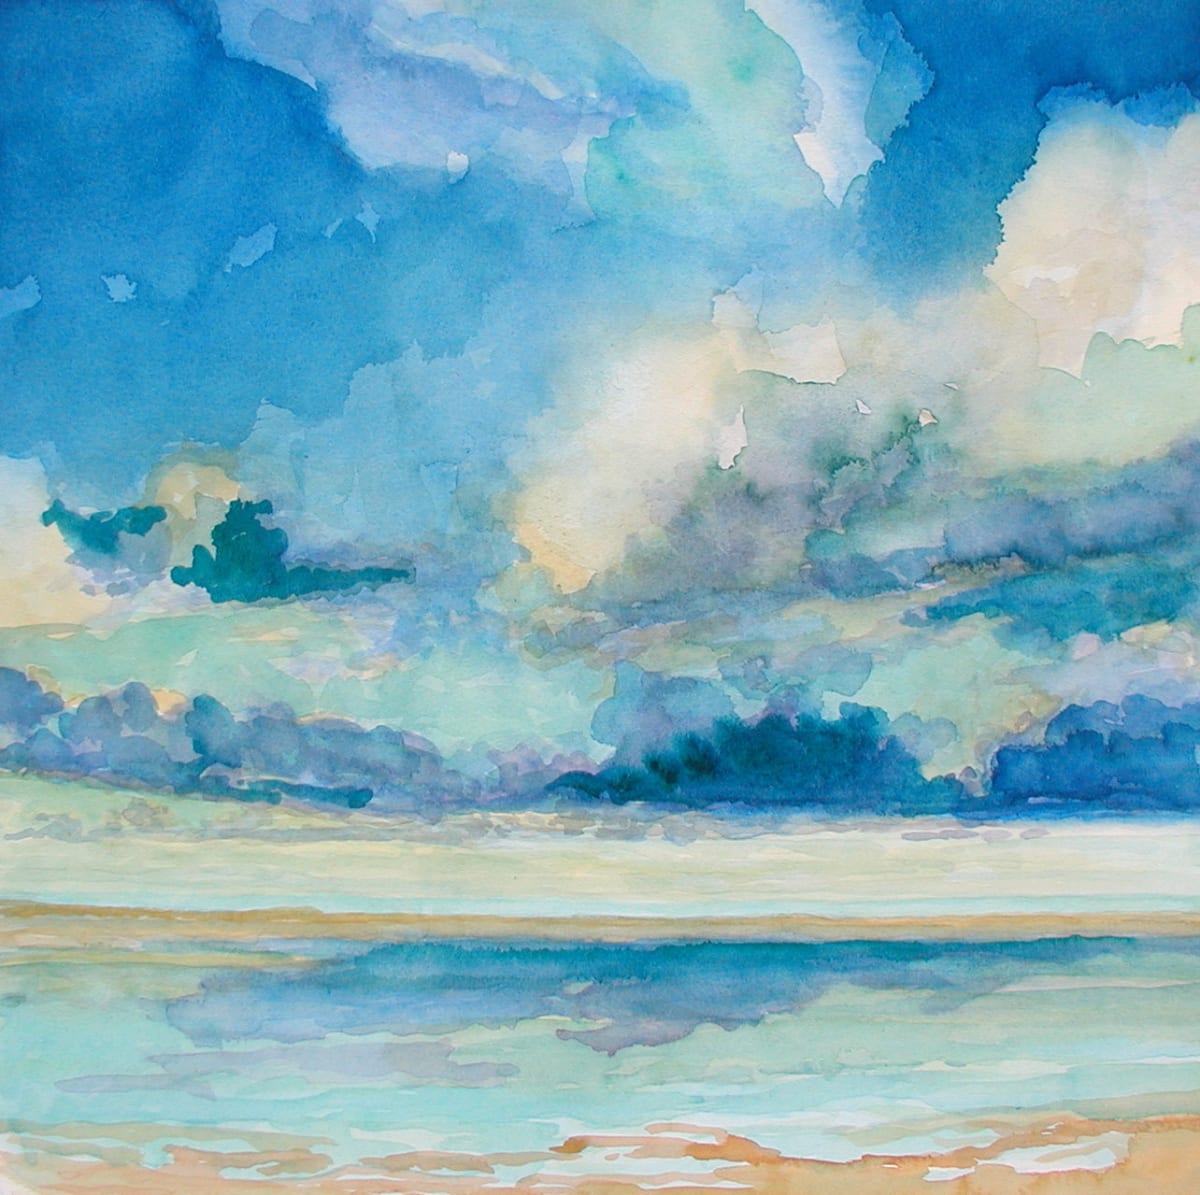 Sky and Water by Catherine Minnery  Image: Sky and Water by Catherine Minnery